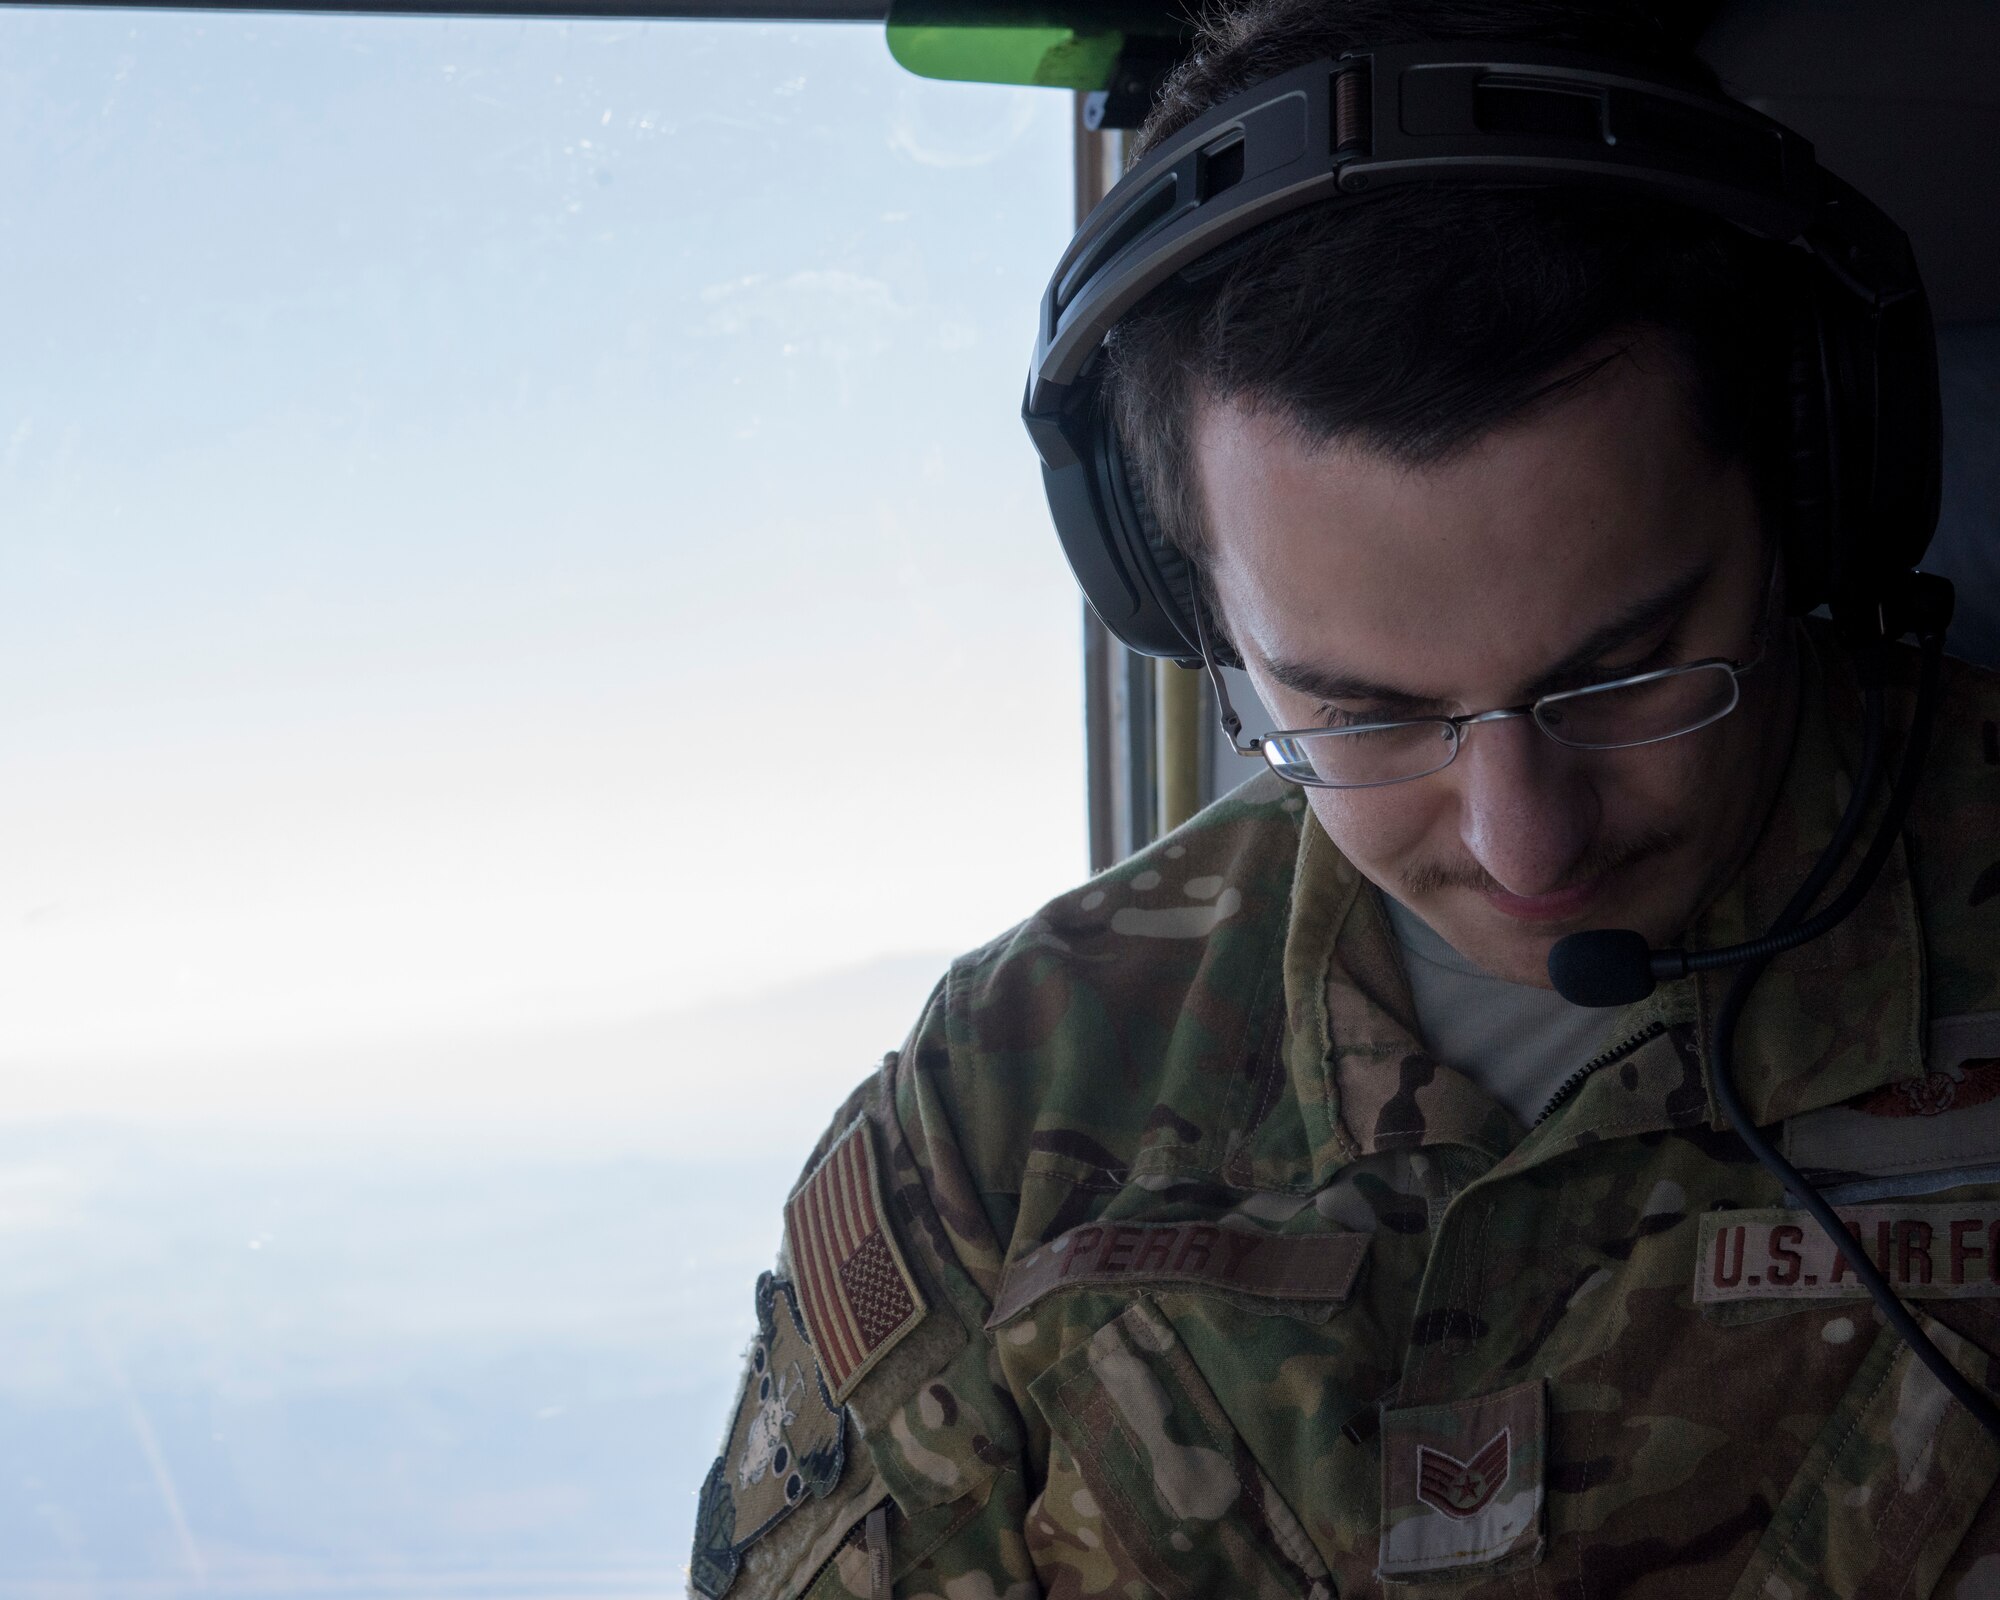 A loadmaster assigned to the 6th Airlift Squadron, Joint Base McGuire-Dix-Lakehurst, N.J., glances down at a map during Exercise JERSEY WRATH 19-1 over Arizona Nov. 13, 2018. Bases from across the country including Luke Air Force Base participated in the mobility-centric training exercise. (U.S. Air Force photo by Airman 1st Class Jacob Wongwai)